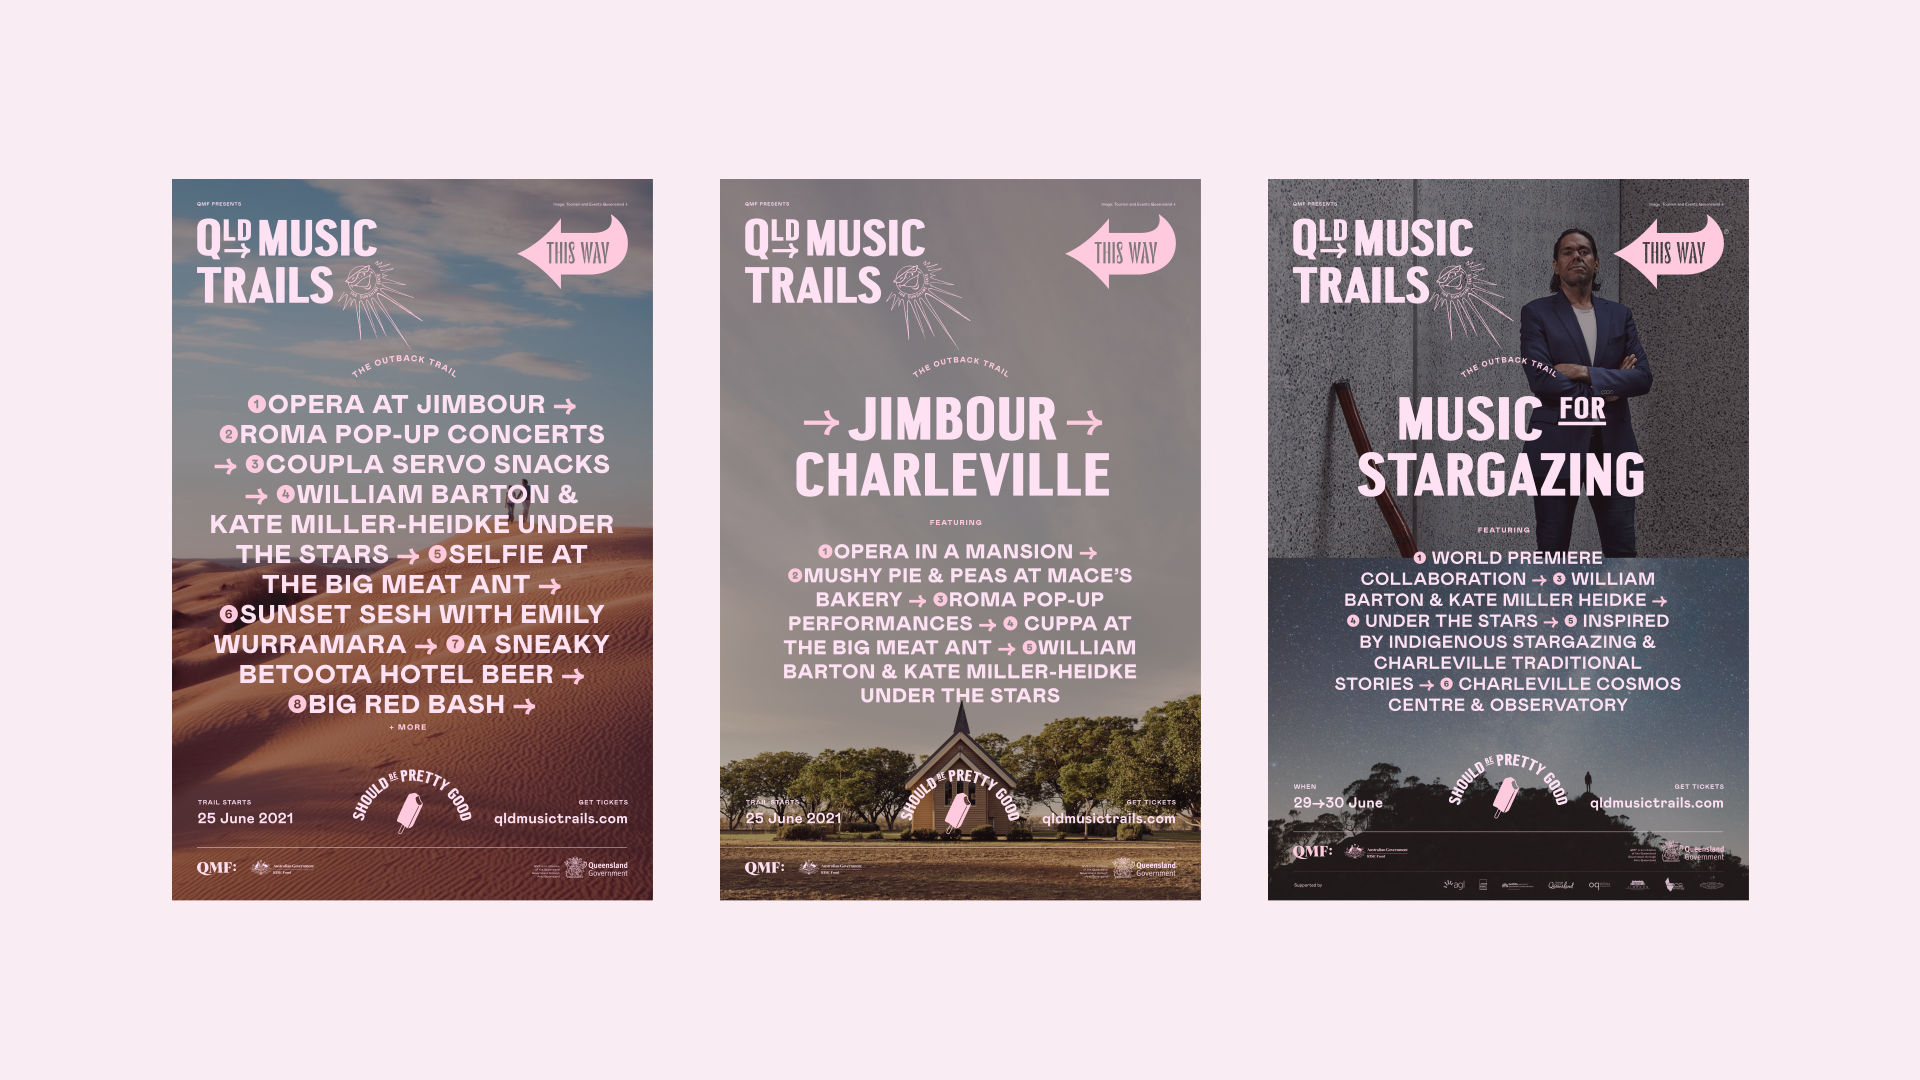 Poster designs for the Trails brand, featuring typography and illustrations